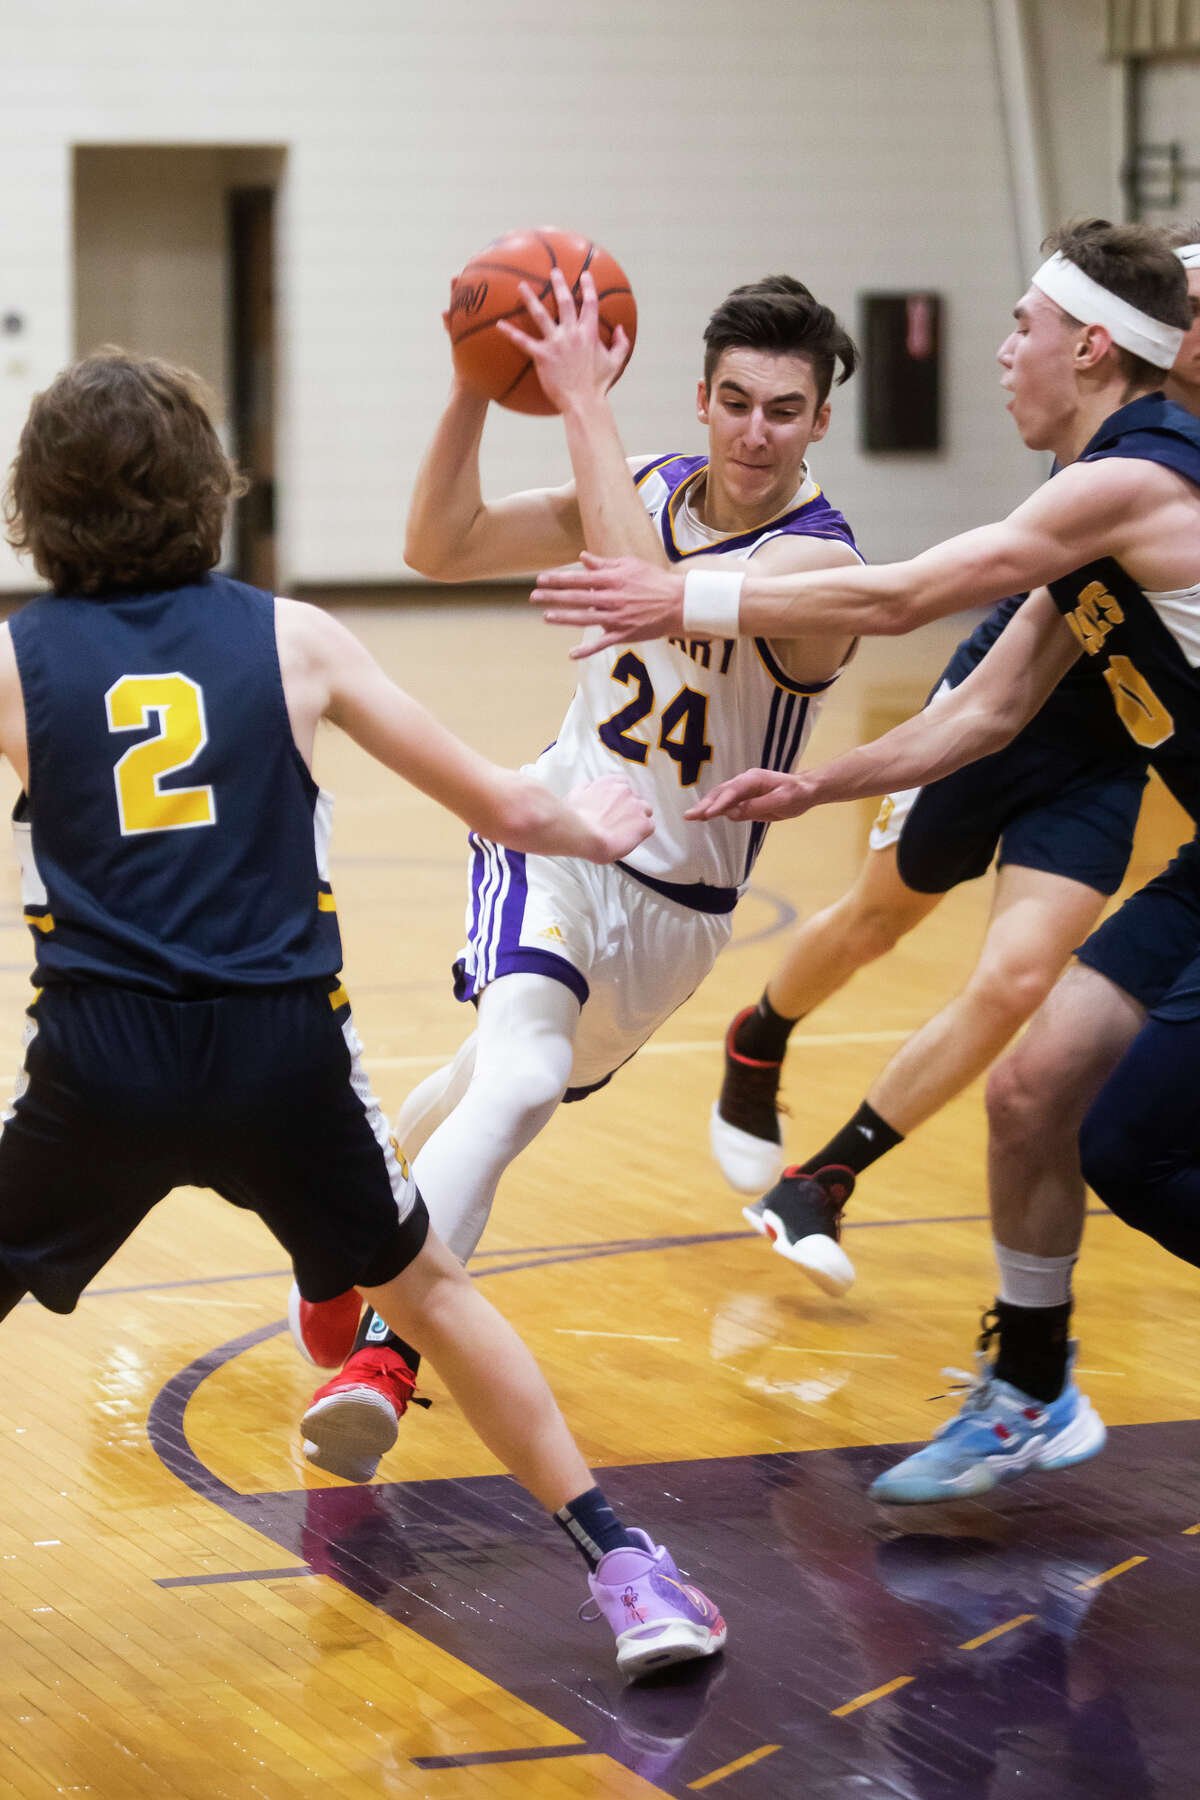 Calvary Eric Grabill drives towards the basket during a game against Breckenridge Tuesday, Feb. 1, 2022 at Calvary Baptist Academy.